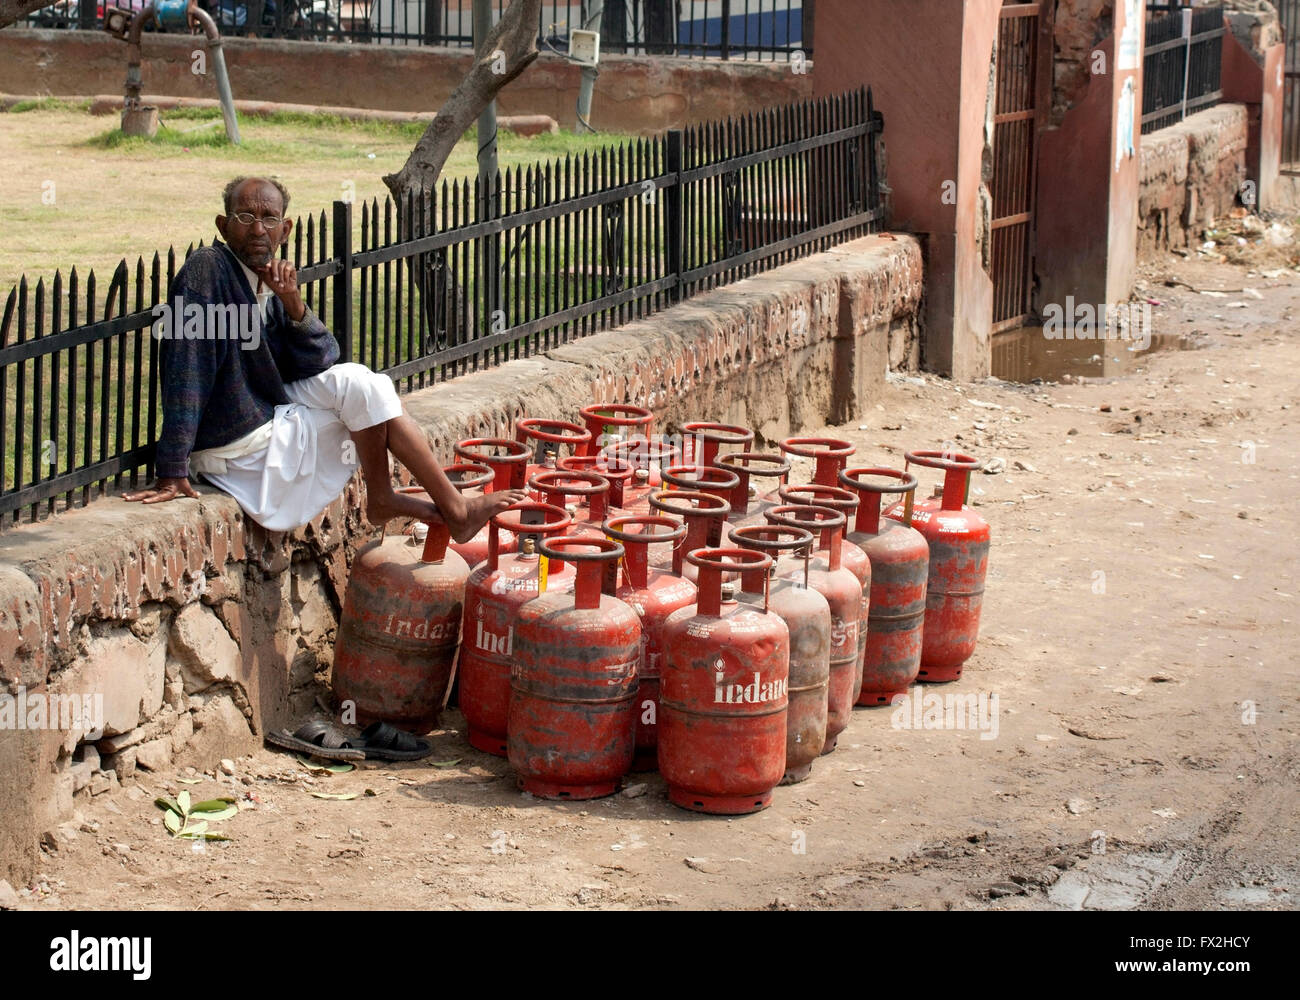 Gas tank vendor Jaipur India sitting on wall with calor gas  tanks Stock Photo